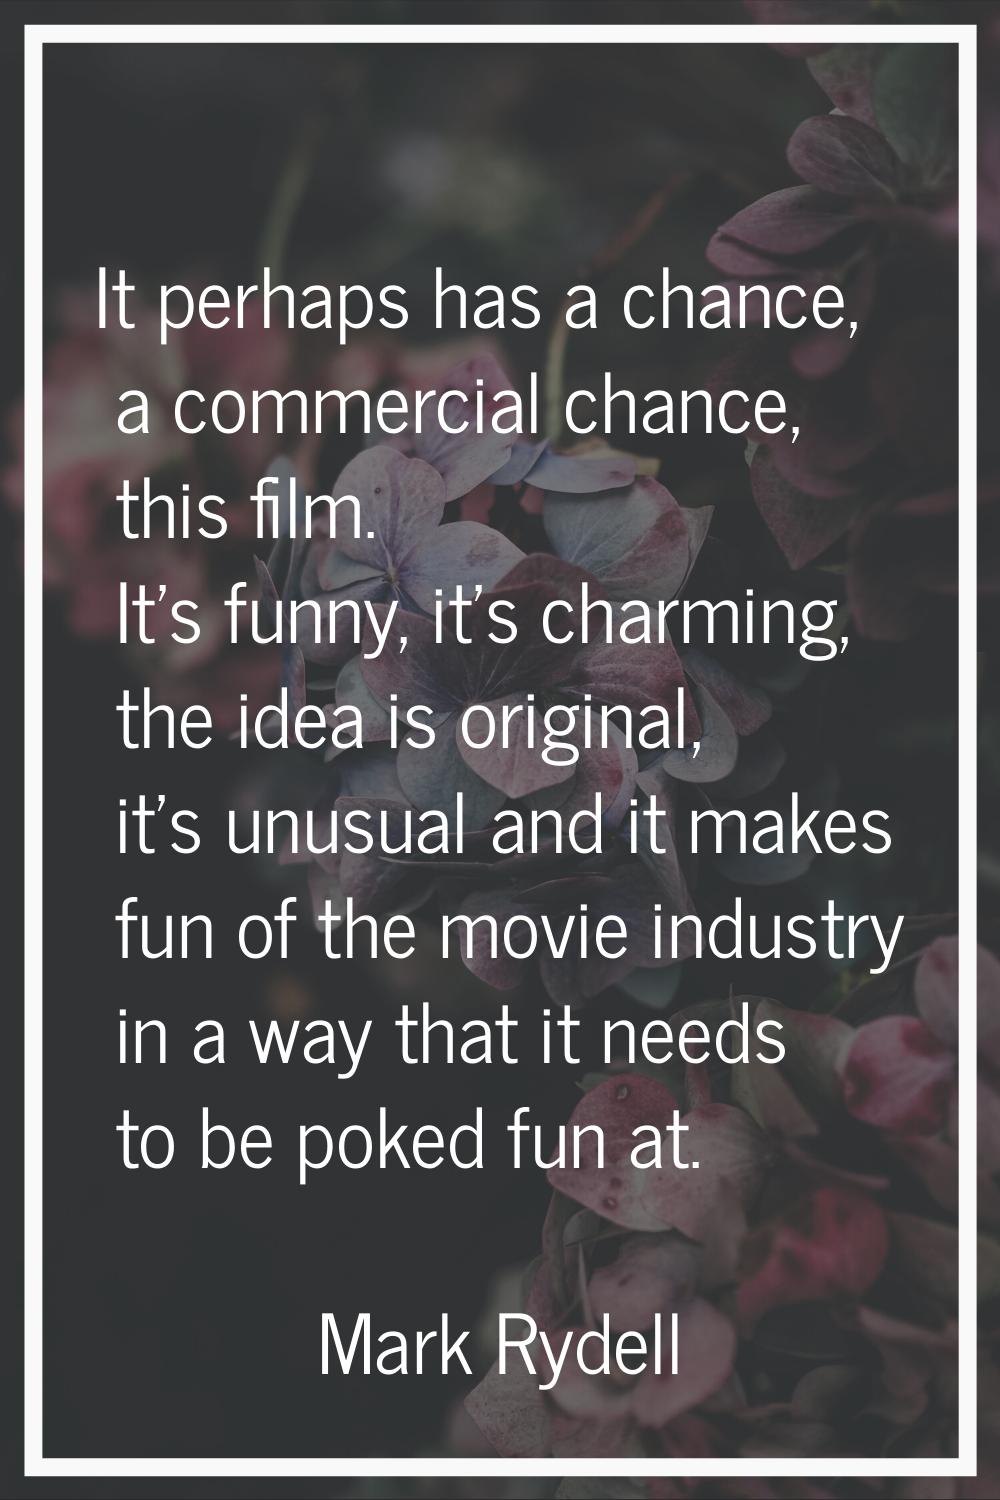 It perhaps has a chance, a commercial chance, this film. It's funny, it's charming, the idea is ori